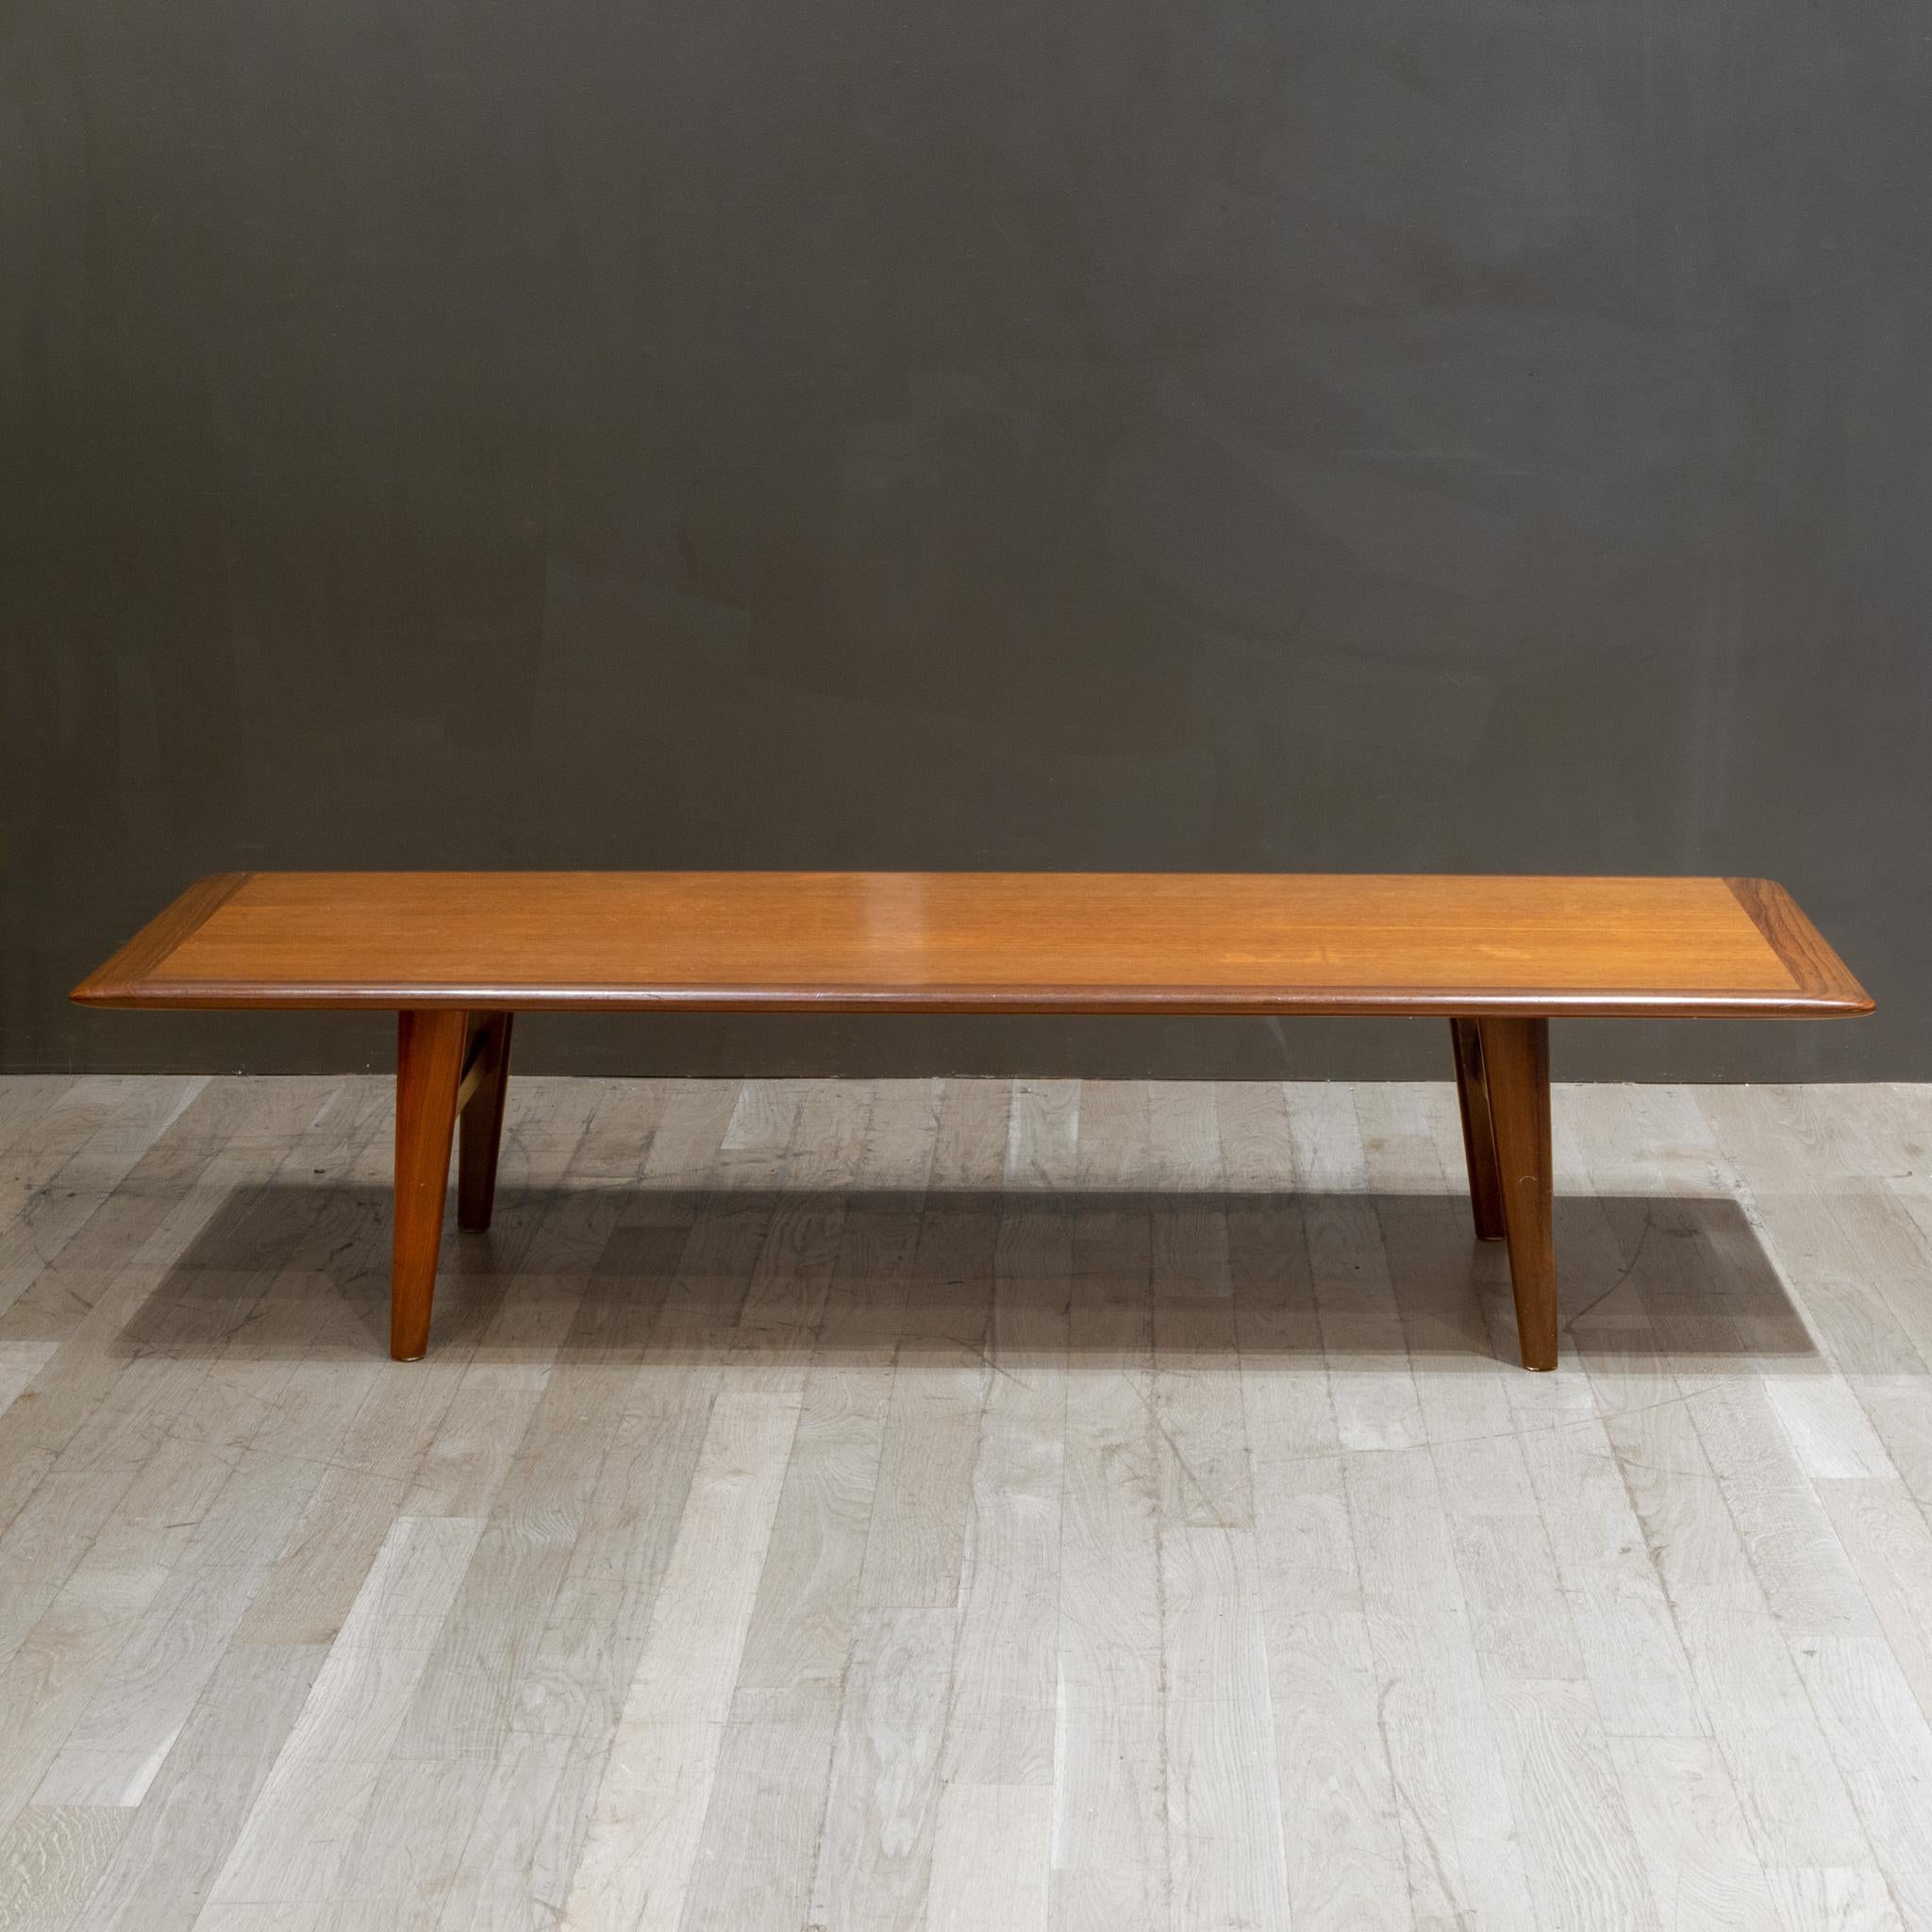 ABOUT

Contact us for more shipping quotes: San Francisco. 

A large midcentury Aase Molle & Traevarefabrik coffee table. Crafted from Teak with Walnut trim and original label.

 CREATOR Aase Molle & Traevarefabrik, Norway.
 DATE OF MANUFACTURE